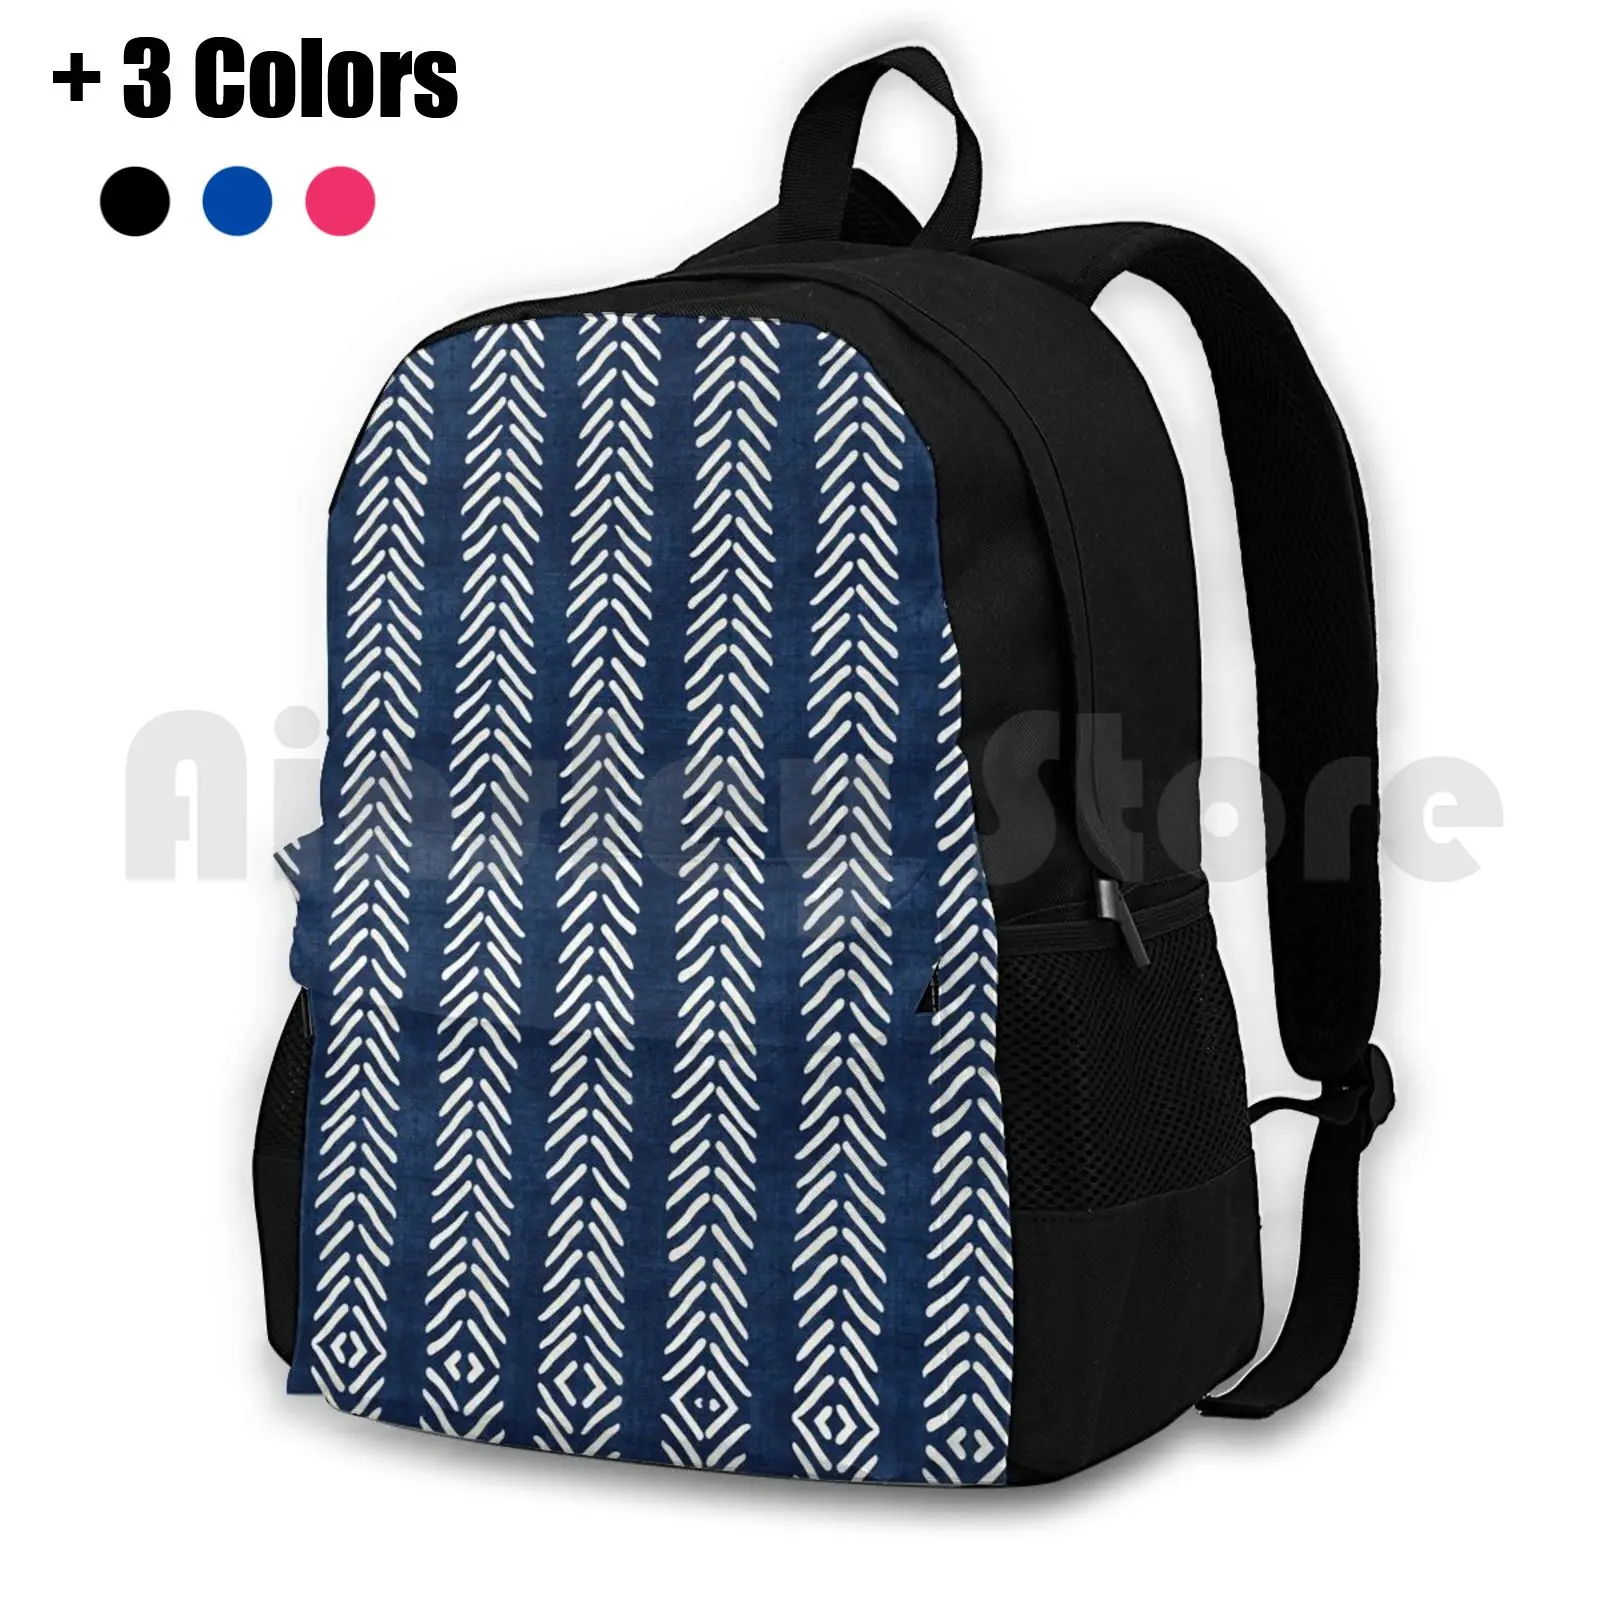 

Mud Cloth Small Arrows In Indigo Outdoor Hiking Backpack Waterproof Camping Travel Mud Cloth Mudcloth Bohemian Tribal Ethnic